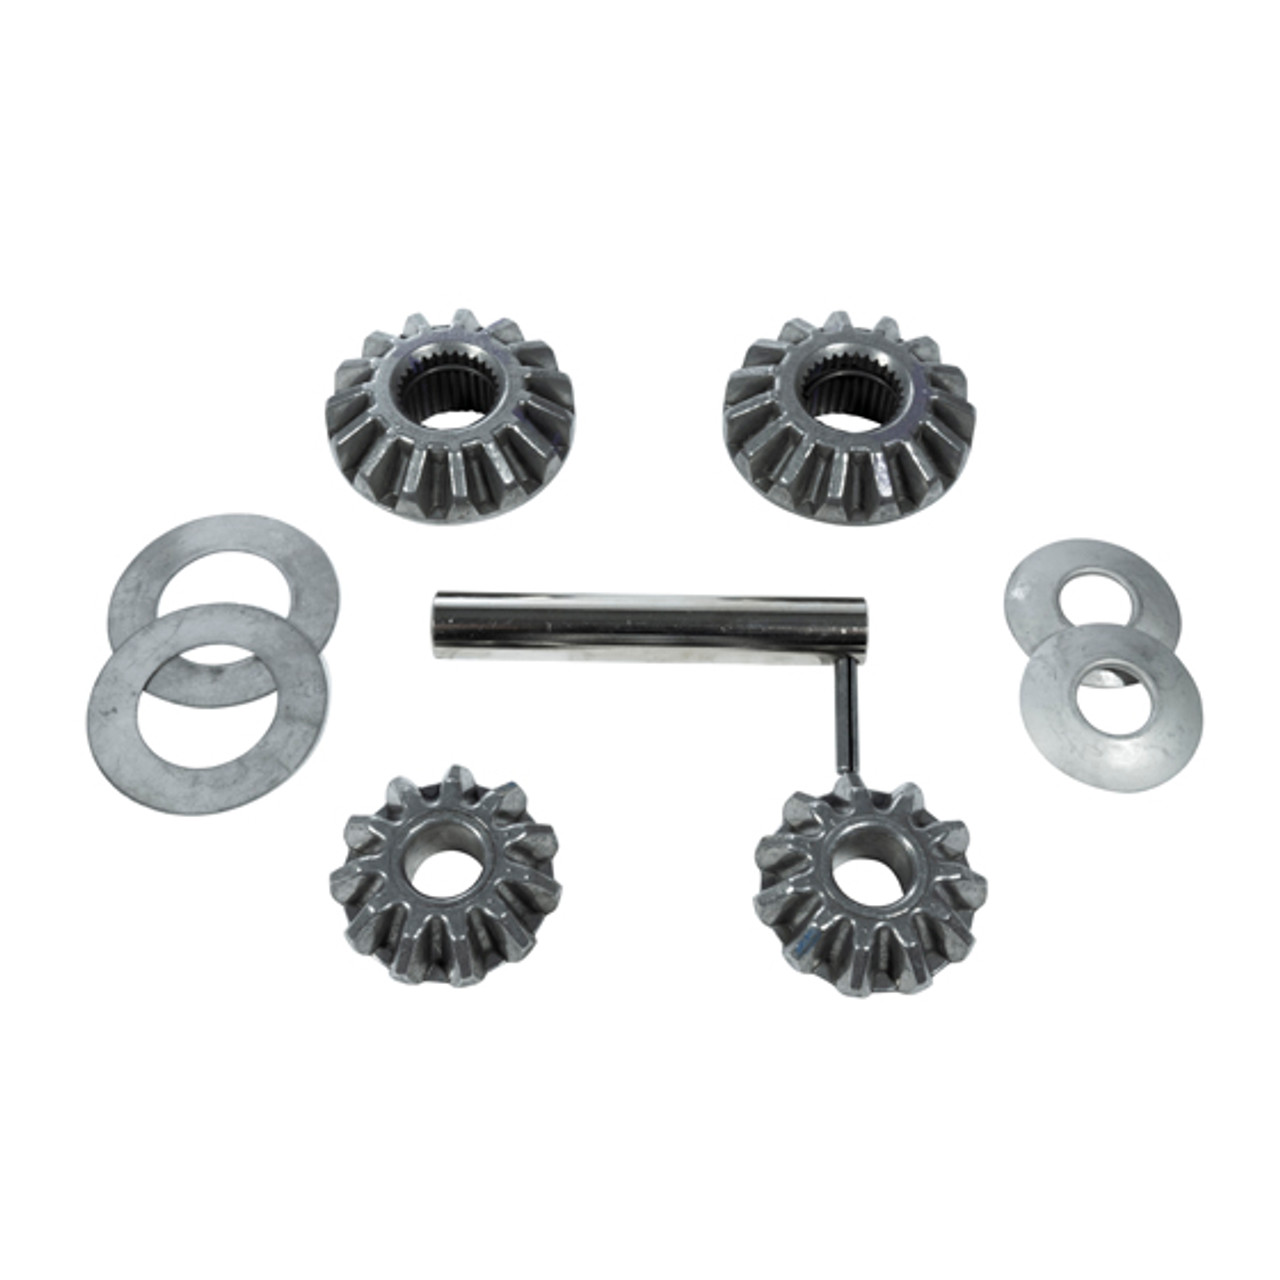 USA Standard Open Spider Gear Set for General Motors with 8.25" IFS and 28 Spline, for 4WD and AWD